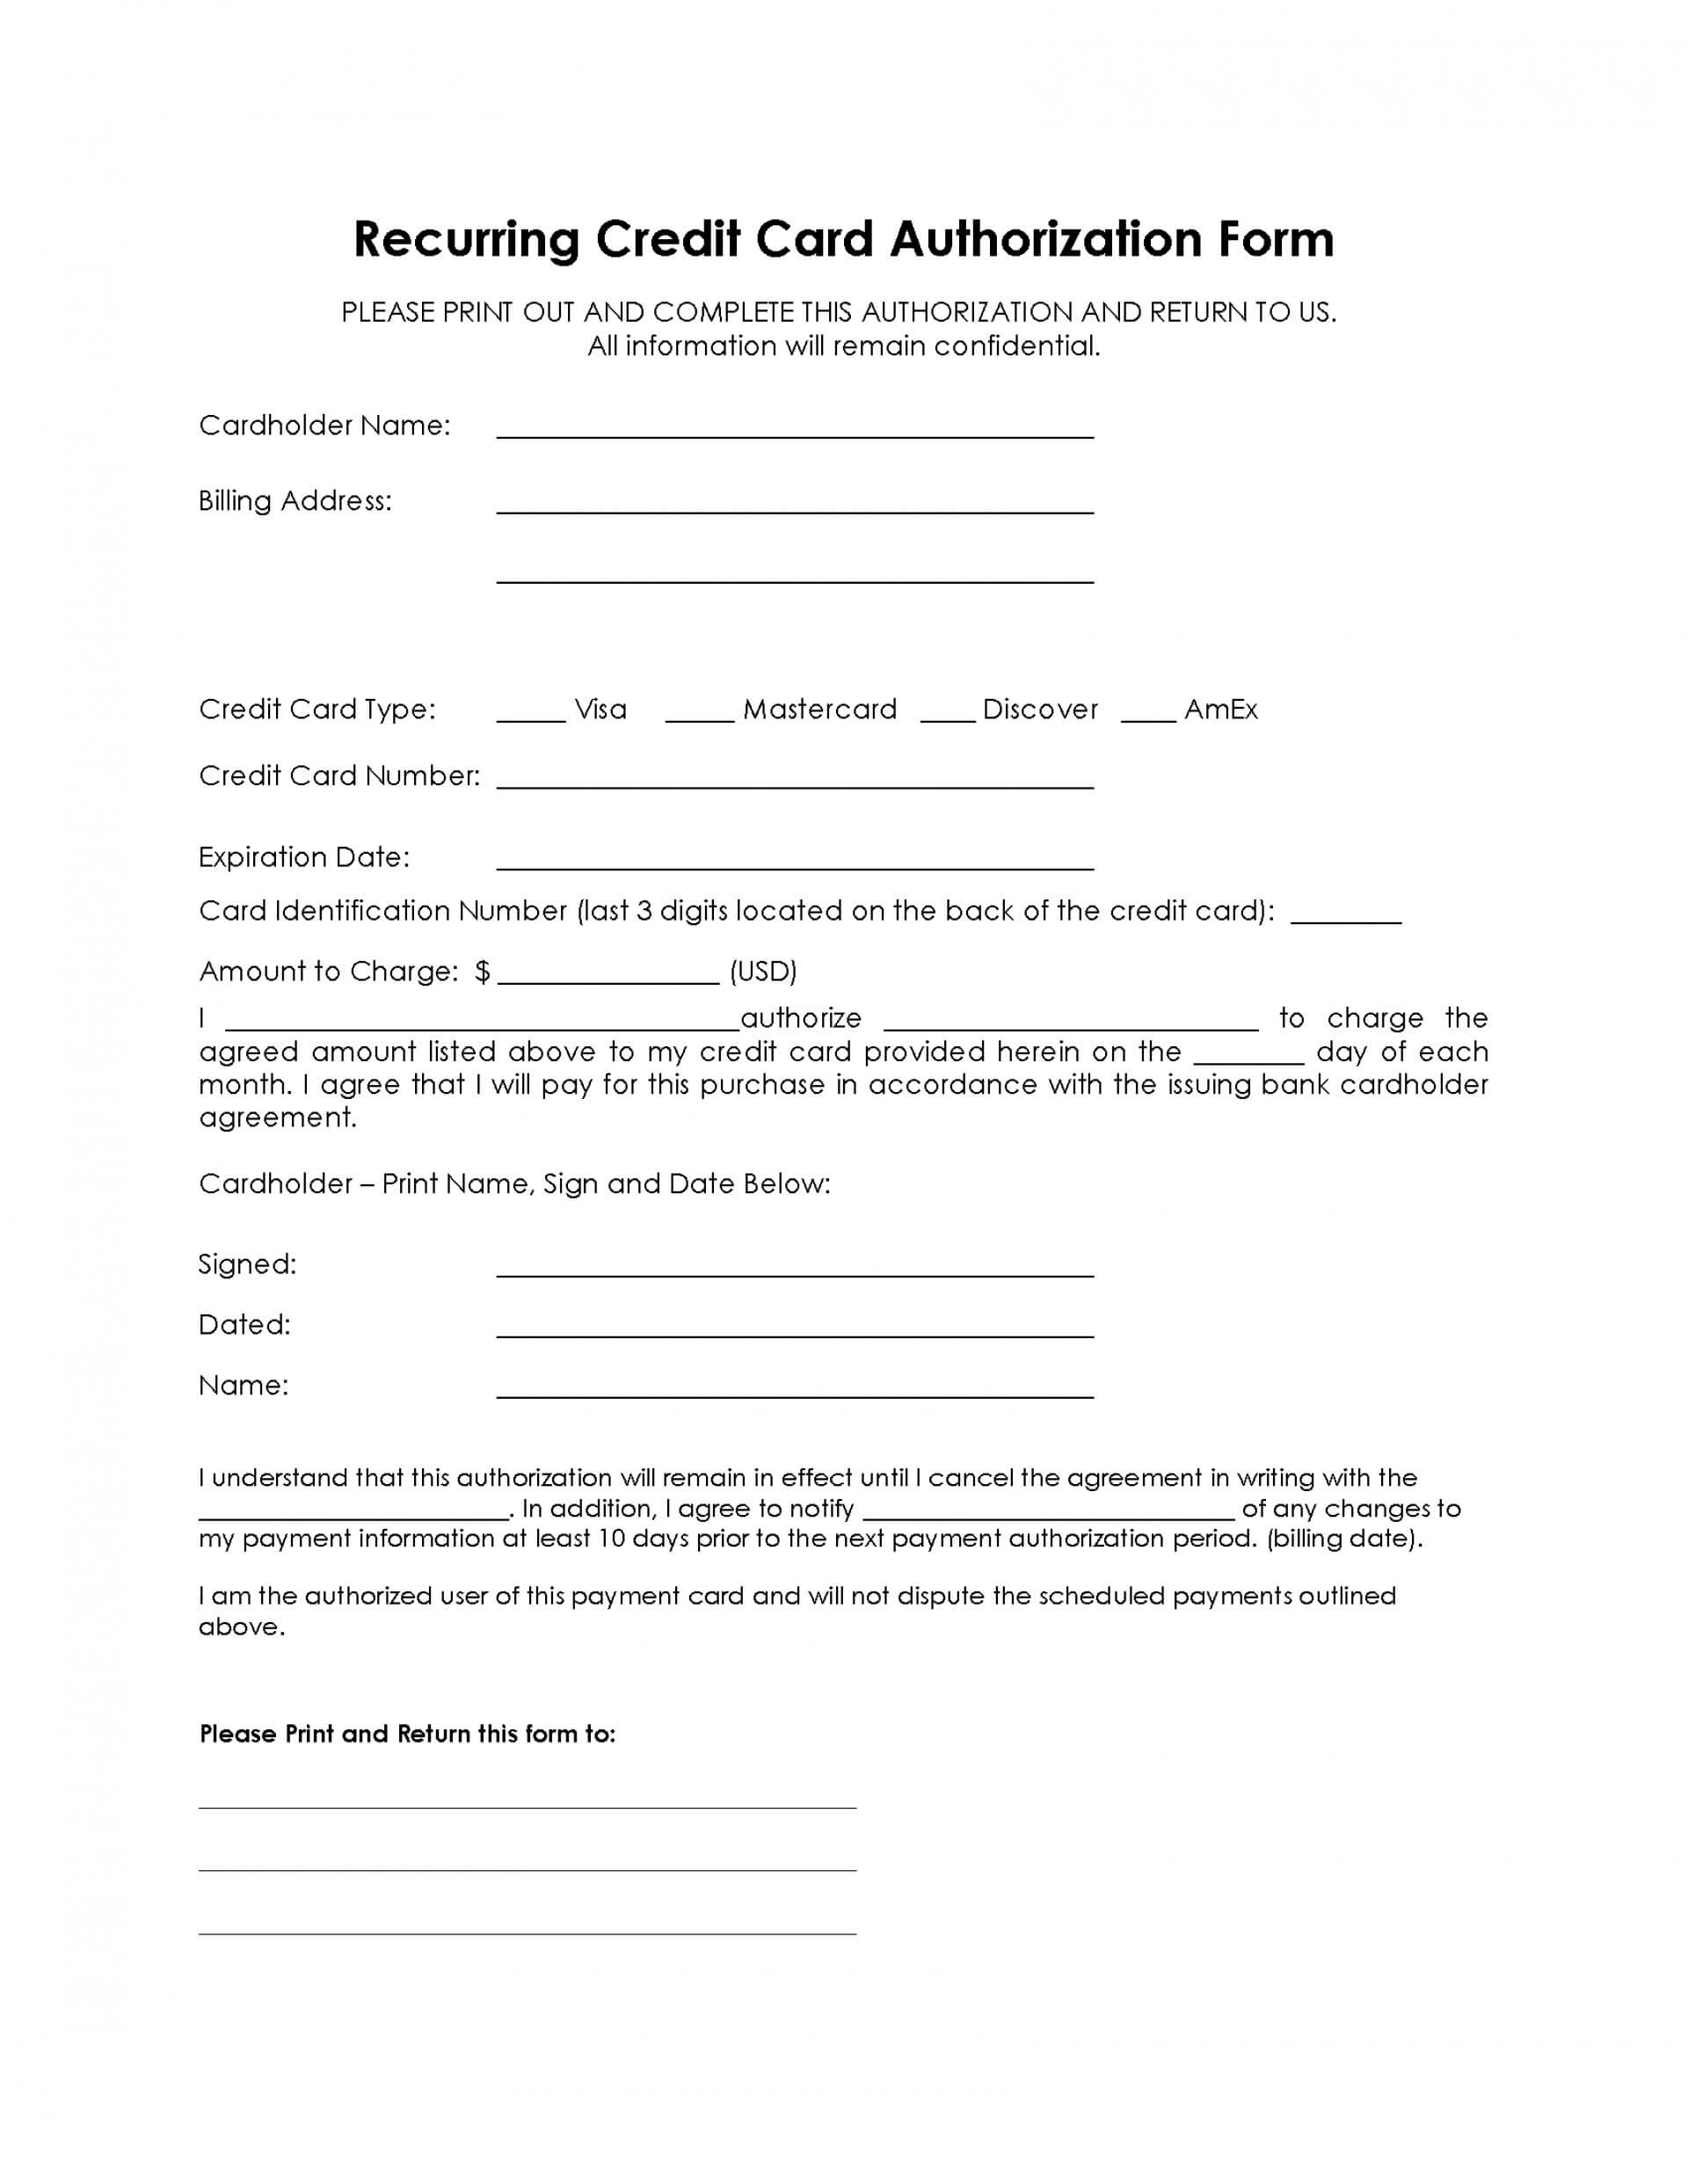 047 Credit Card Authorization Form Template Pdf Recurring Pertaining To Credit Card Billing Authorization Form Template